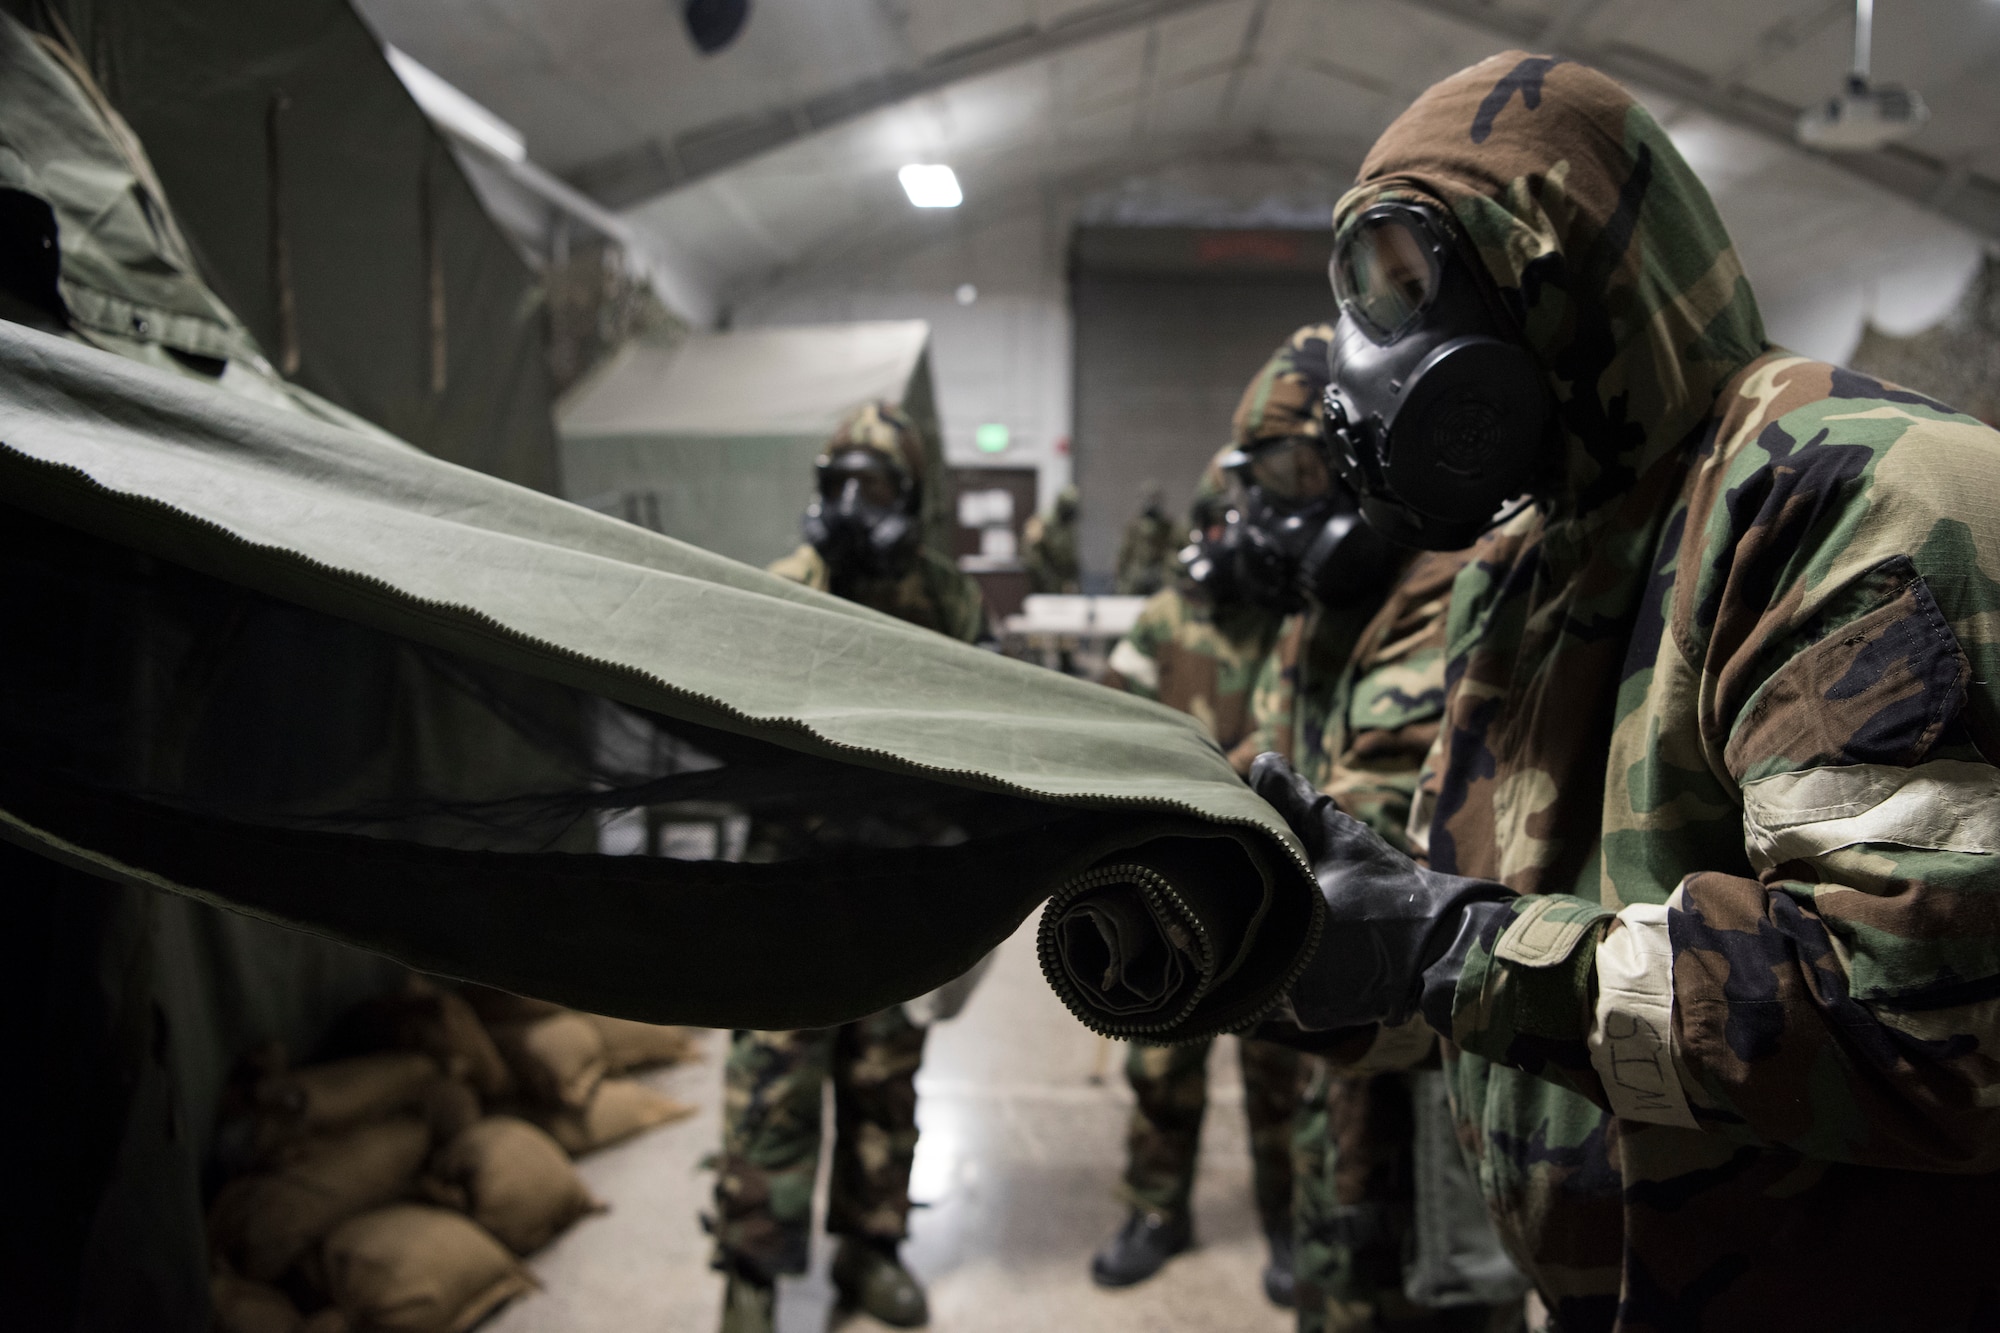 A group of U.S. Air Force Airmen roll up a tent door during a newly-implemented chemical, biological, radiological and nuclear defense training course exercise at Joint Base Elmendorf-Richardson, Alaska, Jan. 8, 2019. One of the key changes made embraces the reintegration of hands-on, in-person instruction, and reduces computer based training, allowing Airmen to receive a more tailored learning experience. (U.S. Air Force photo by Airman 1st Class Crystal A. Jenkins)